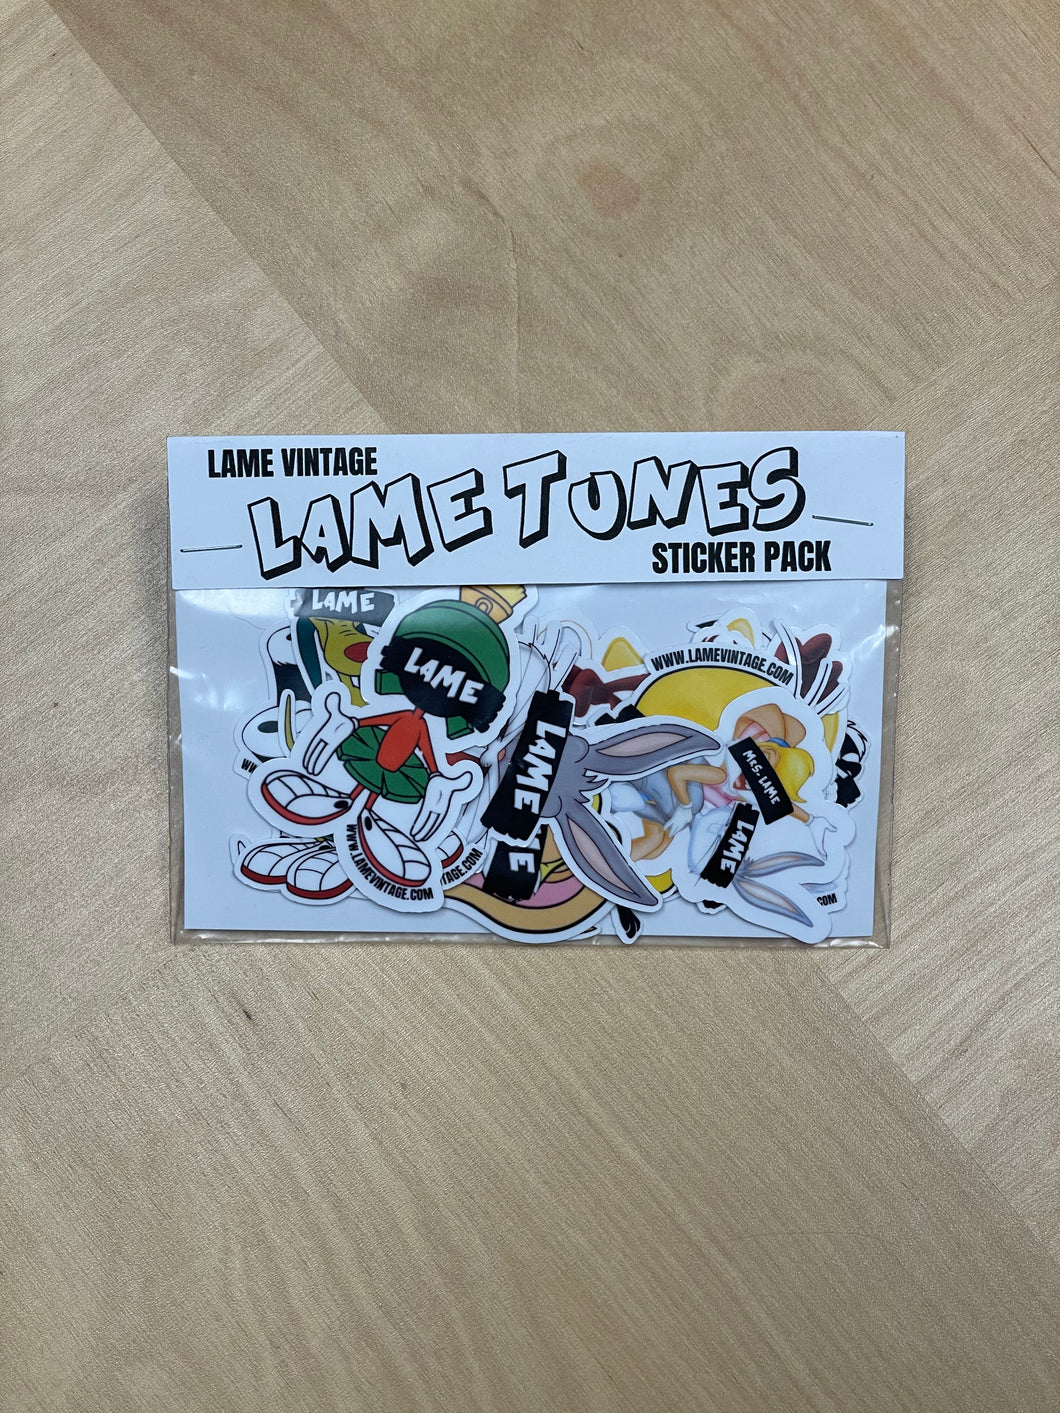 Lame Tunes Sticker Pack